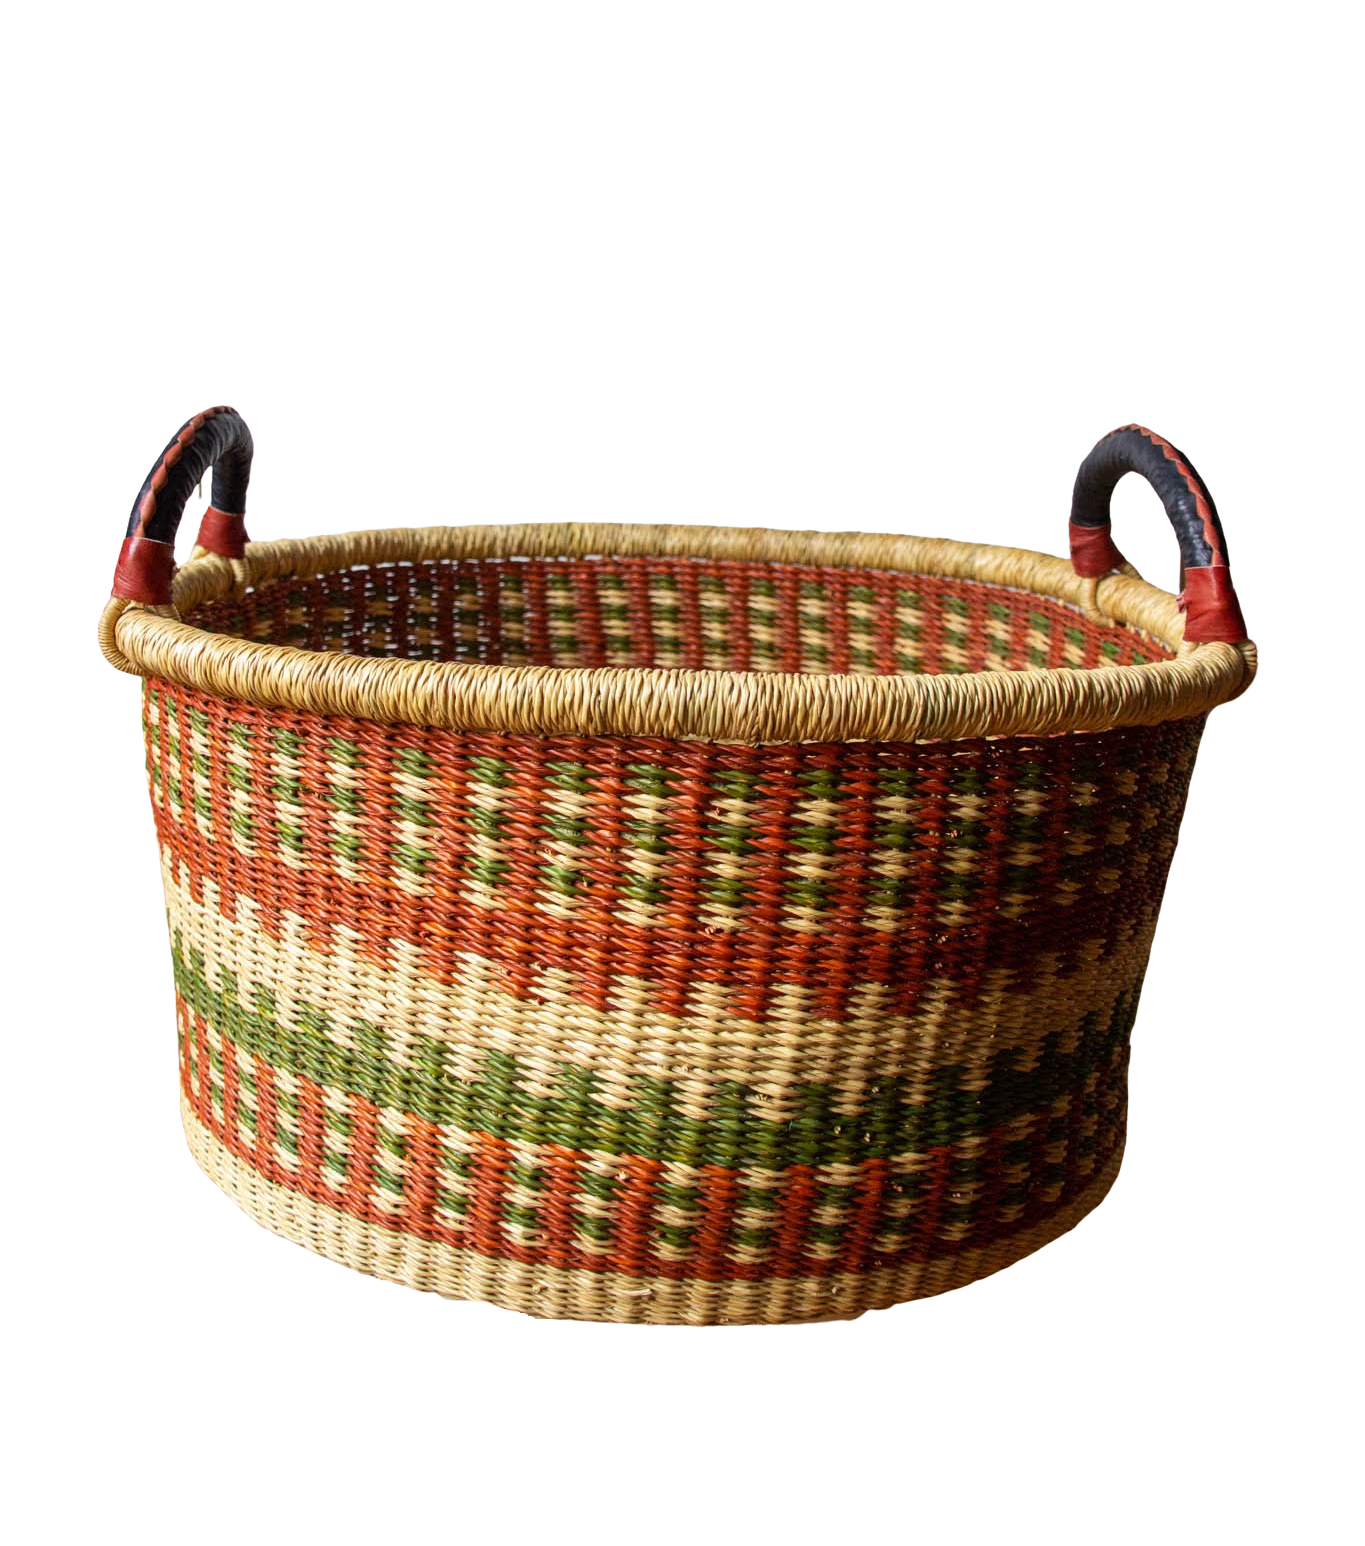 Terracotta and green Baba Half laundry Basket